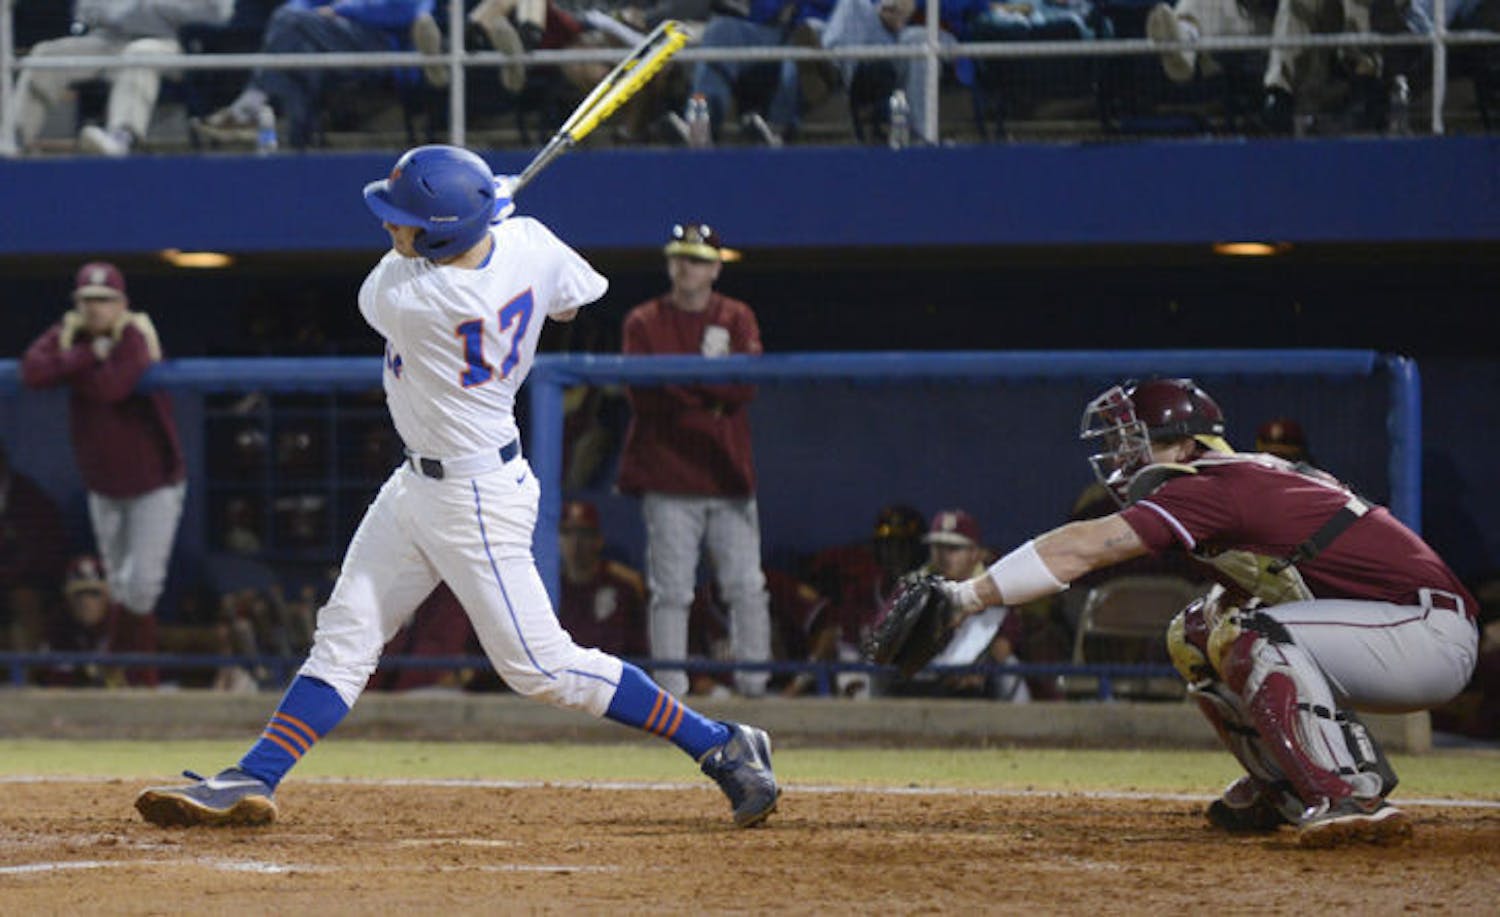 Taylor Gushue swings during Florida’s 4-1 loss against Florida State on Mar. 12, 2013, at McKethan Stadium. Gushue tied for the team lead with five home runs last year. Florida opens its season at home against Maryland tonight at 7.